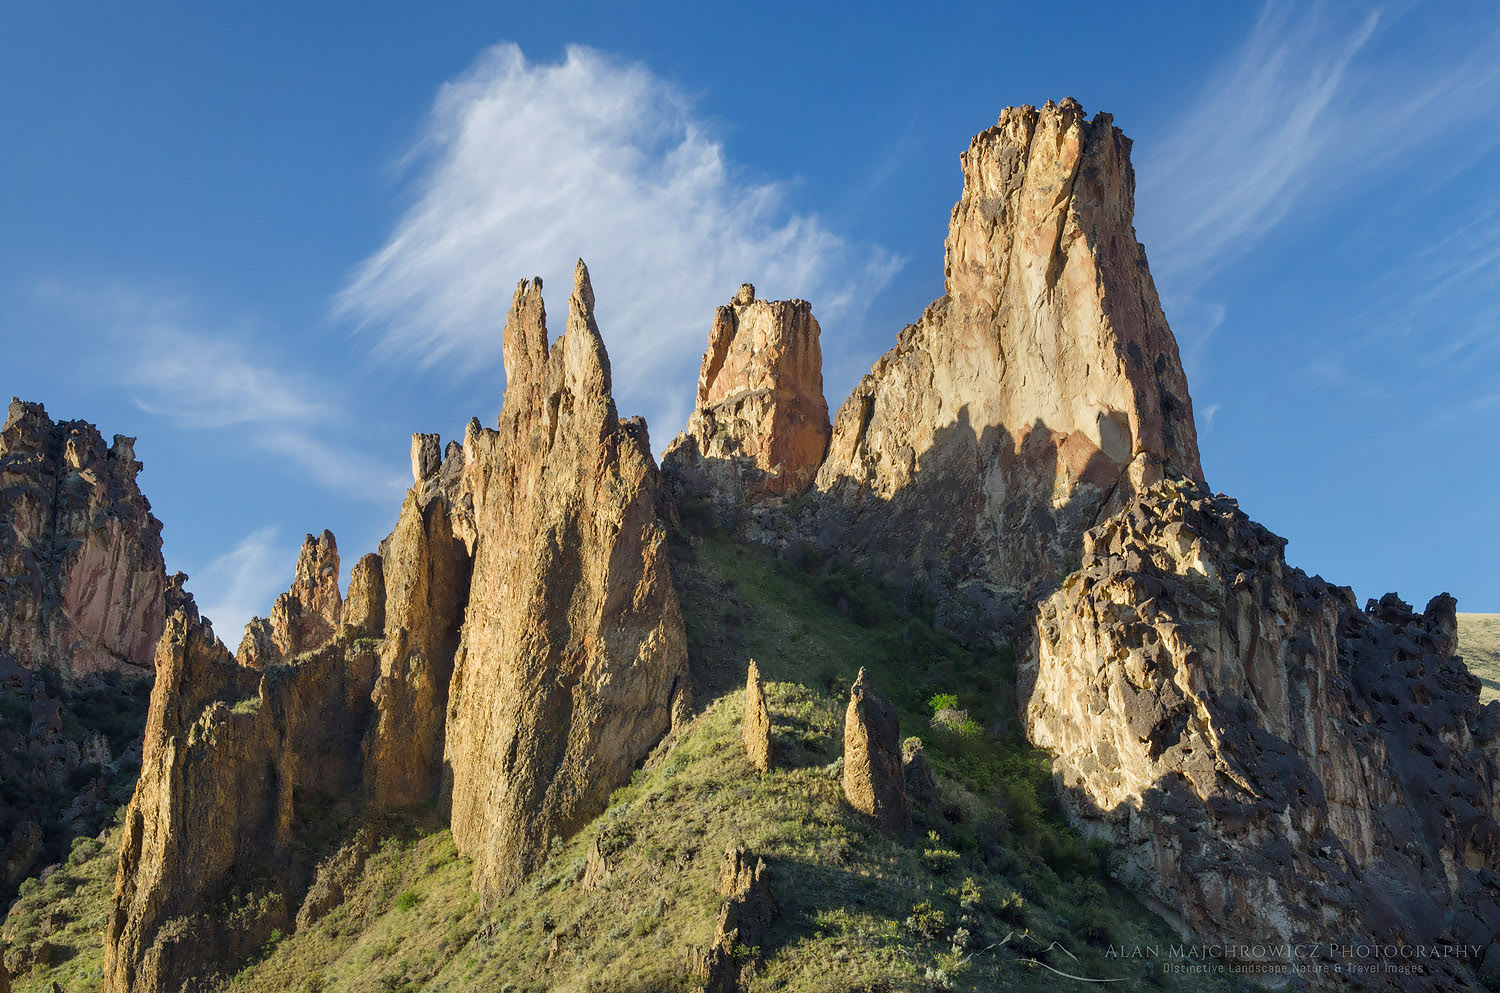 Spires and rock formations made of volcanic tuff in Leslie Gulch in the Owyhee Uplands of SE Oregon #48003